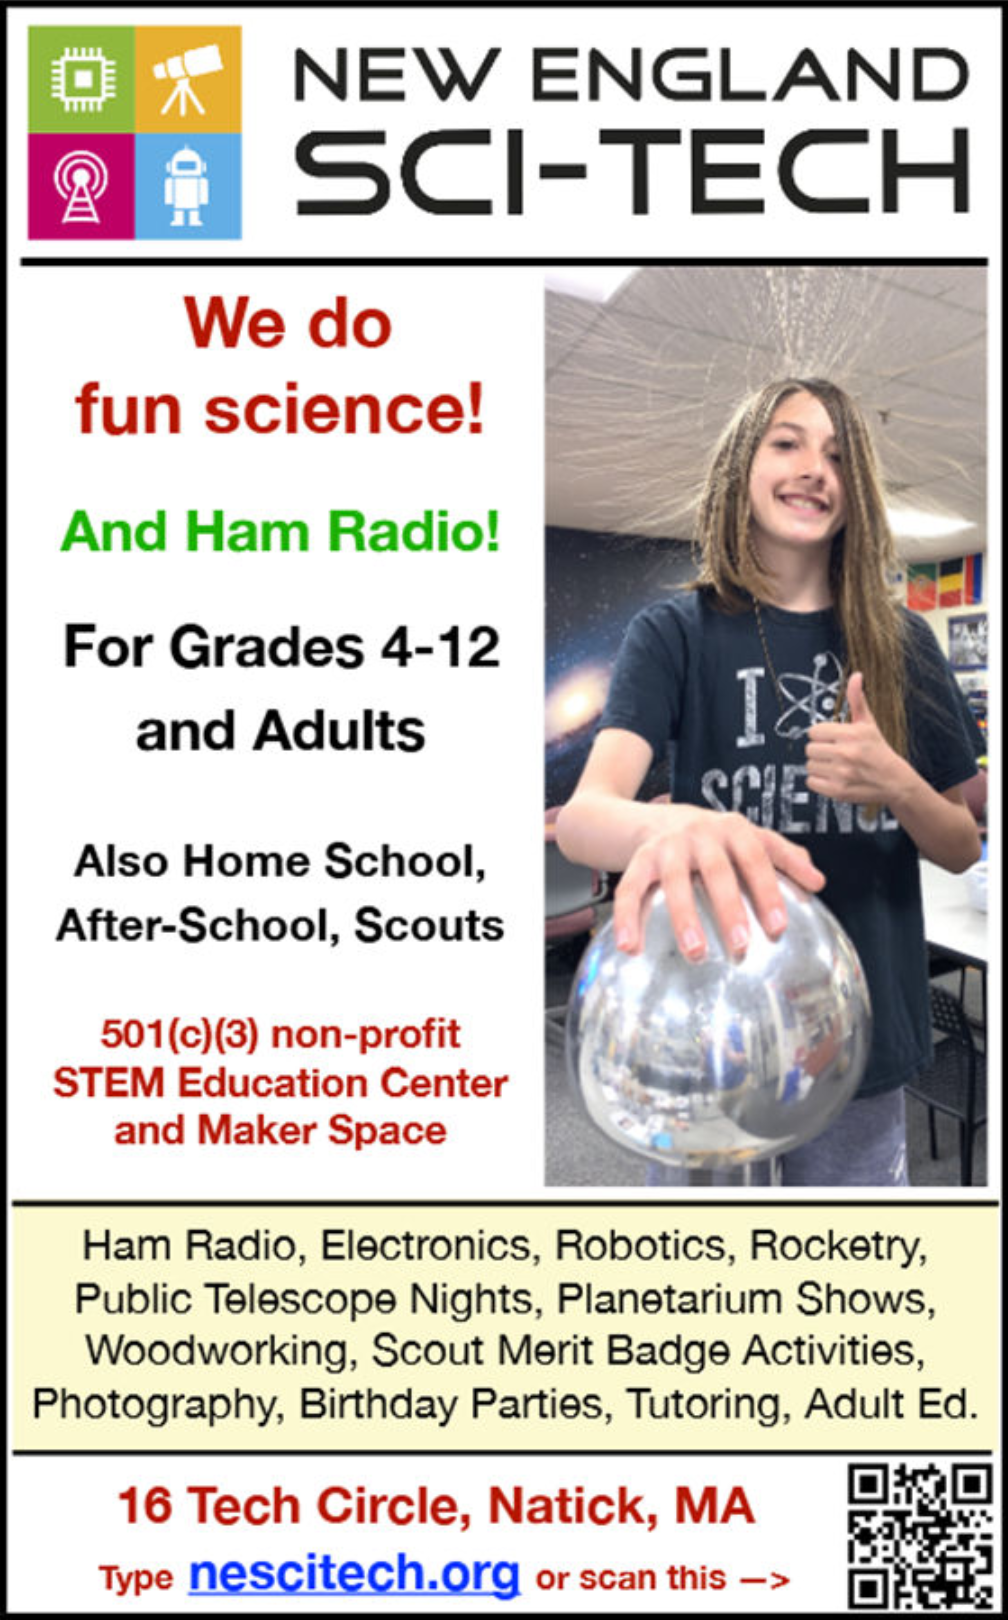 New Engalnd Sci-Tech: We Do Fun Science! ad